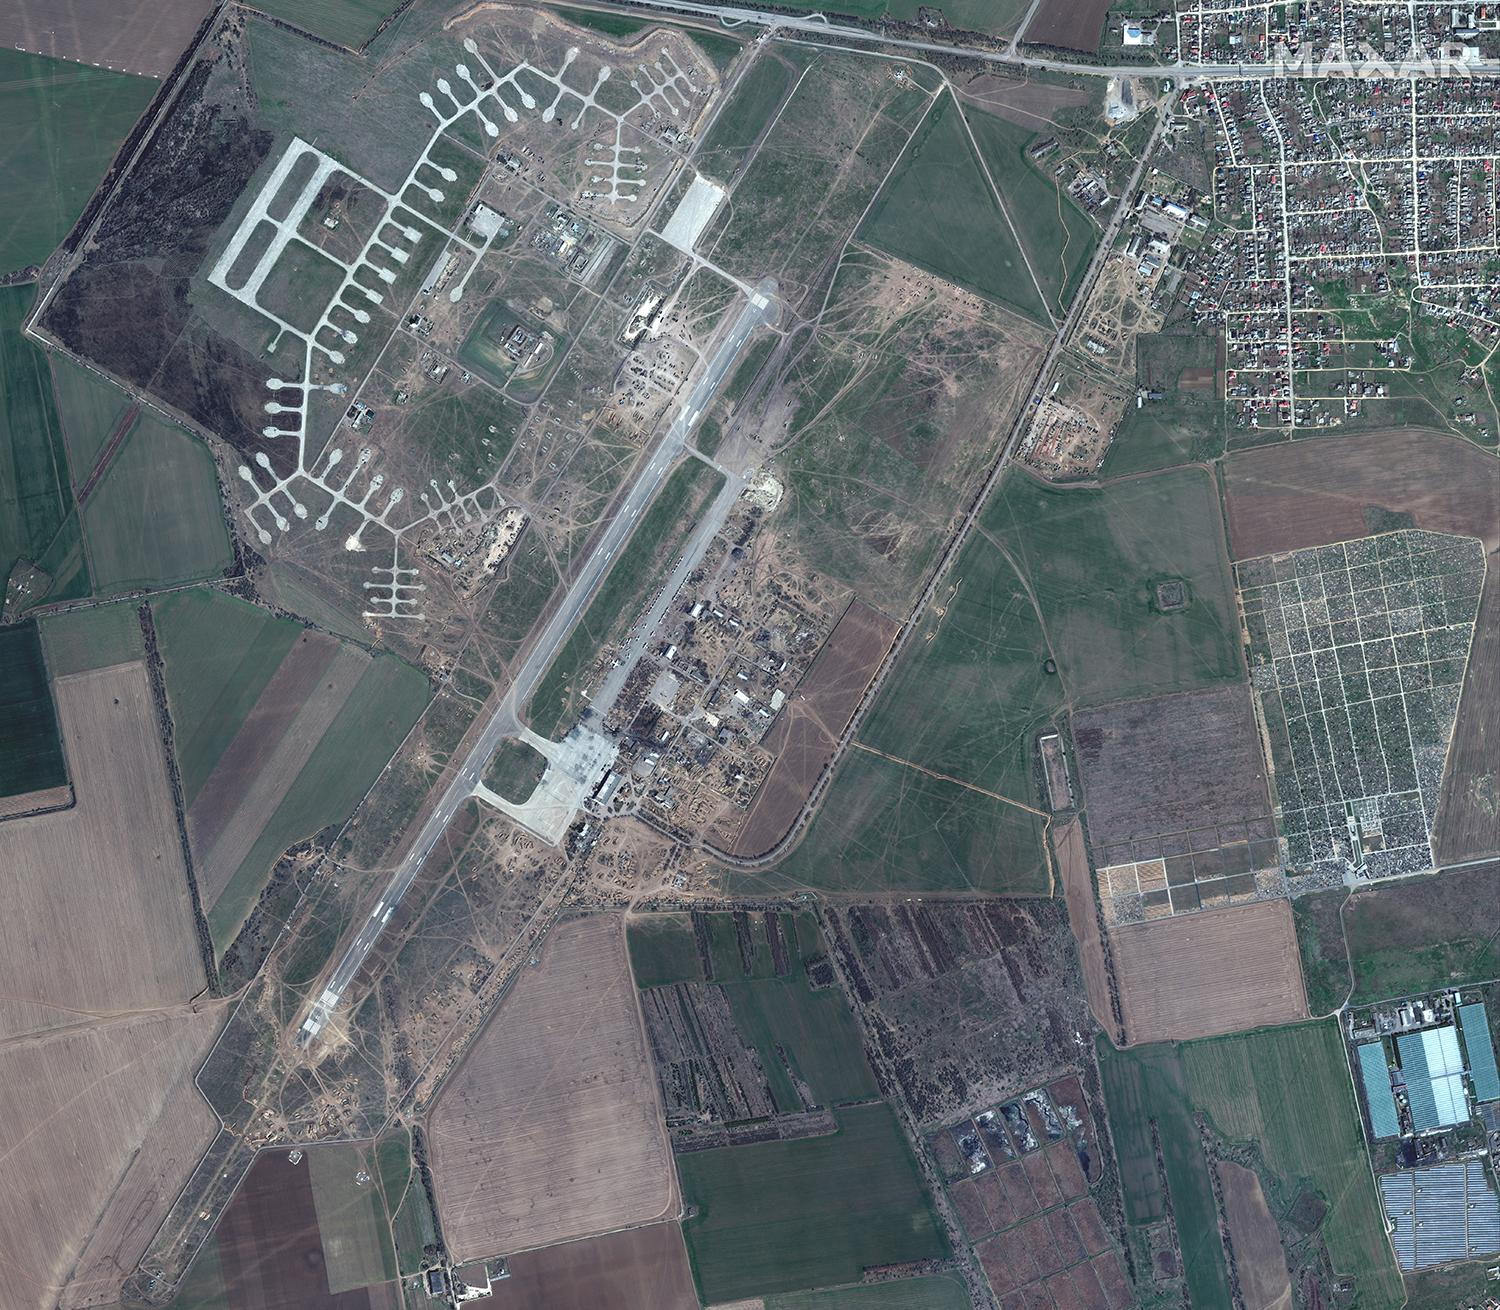 Panoramic Maxar satellite image of Kherson Airport and deployment activities in Kherson, Ukraine, on April 7.